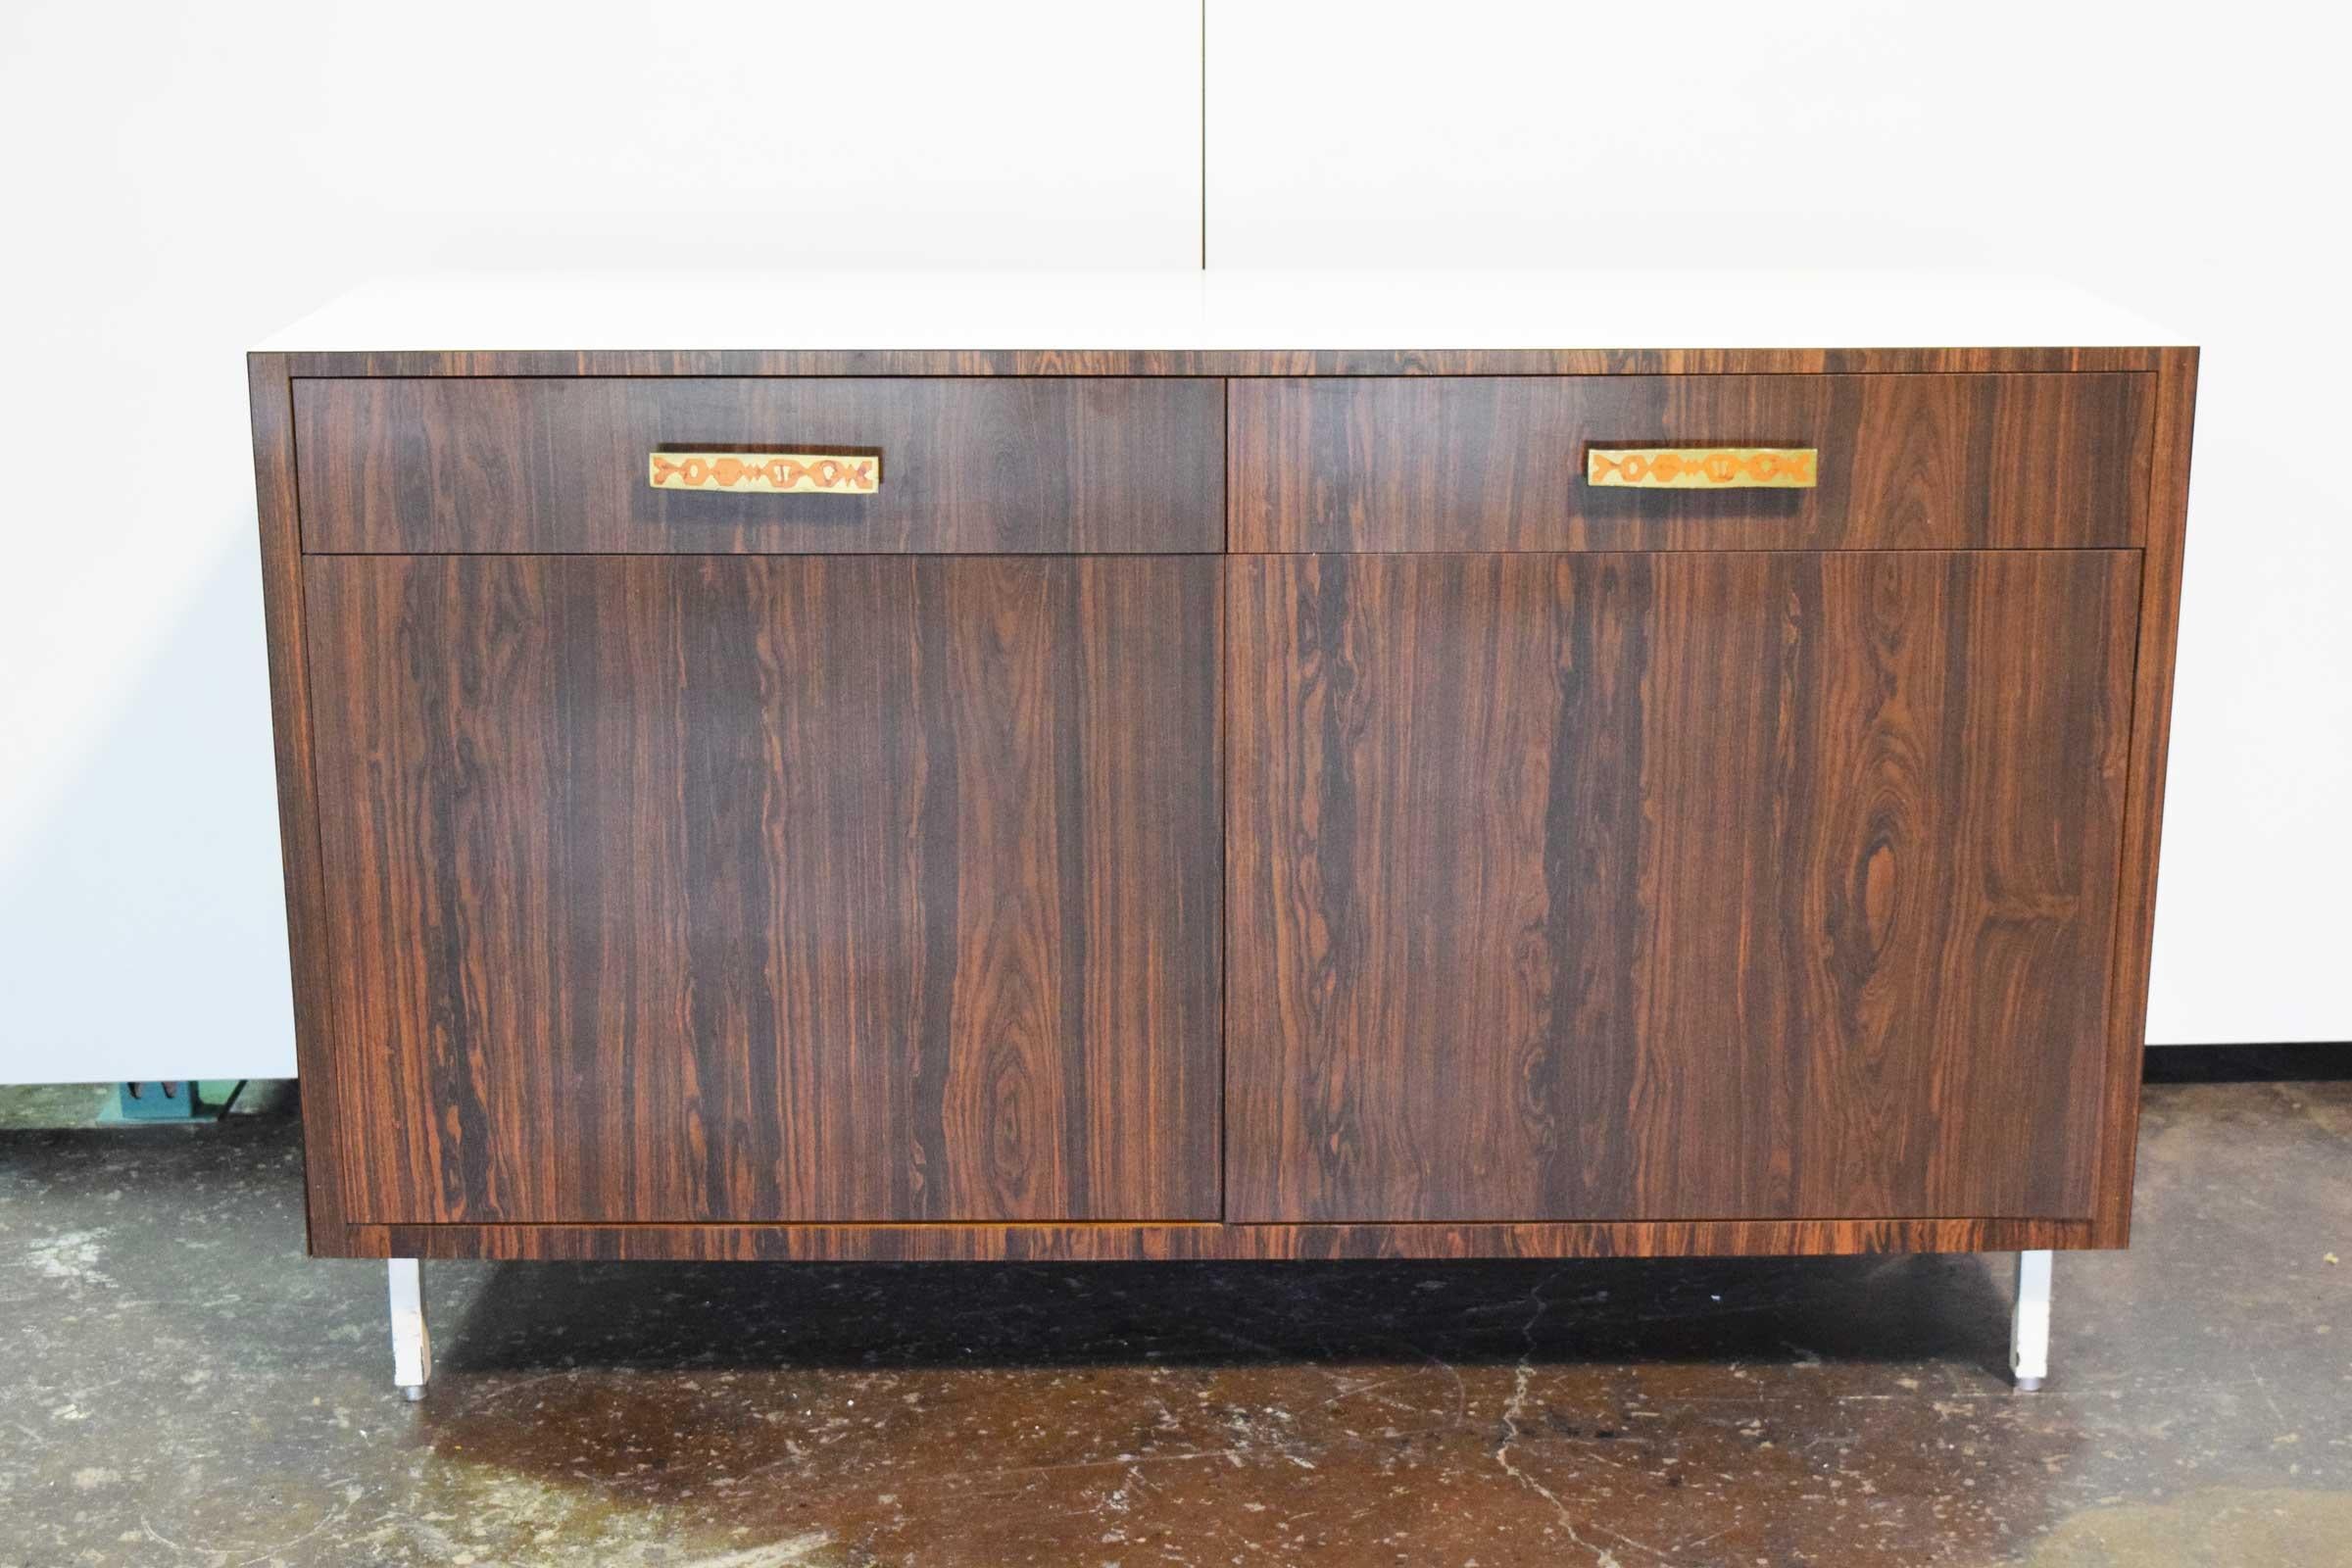 Midcentury sideboard with decorative hardware and white laminate top.